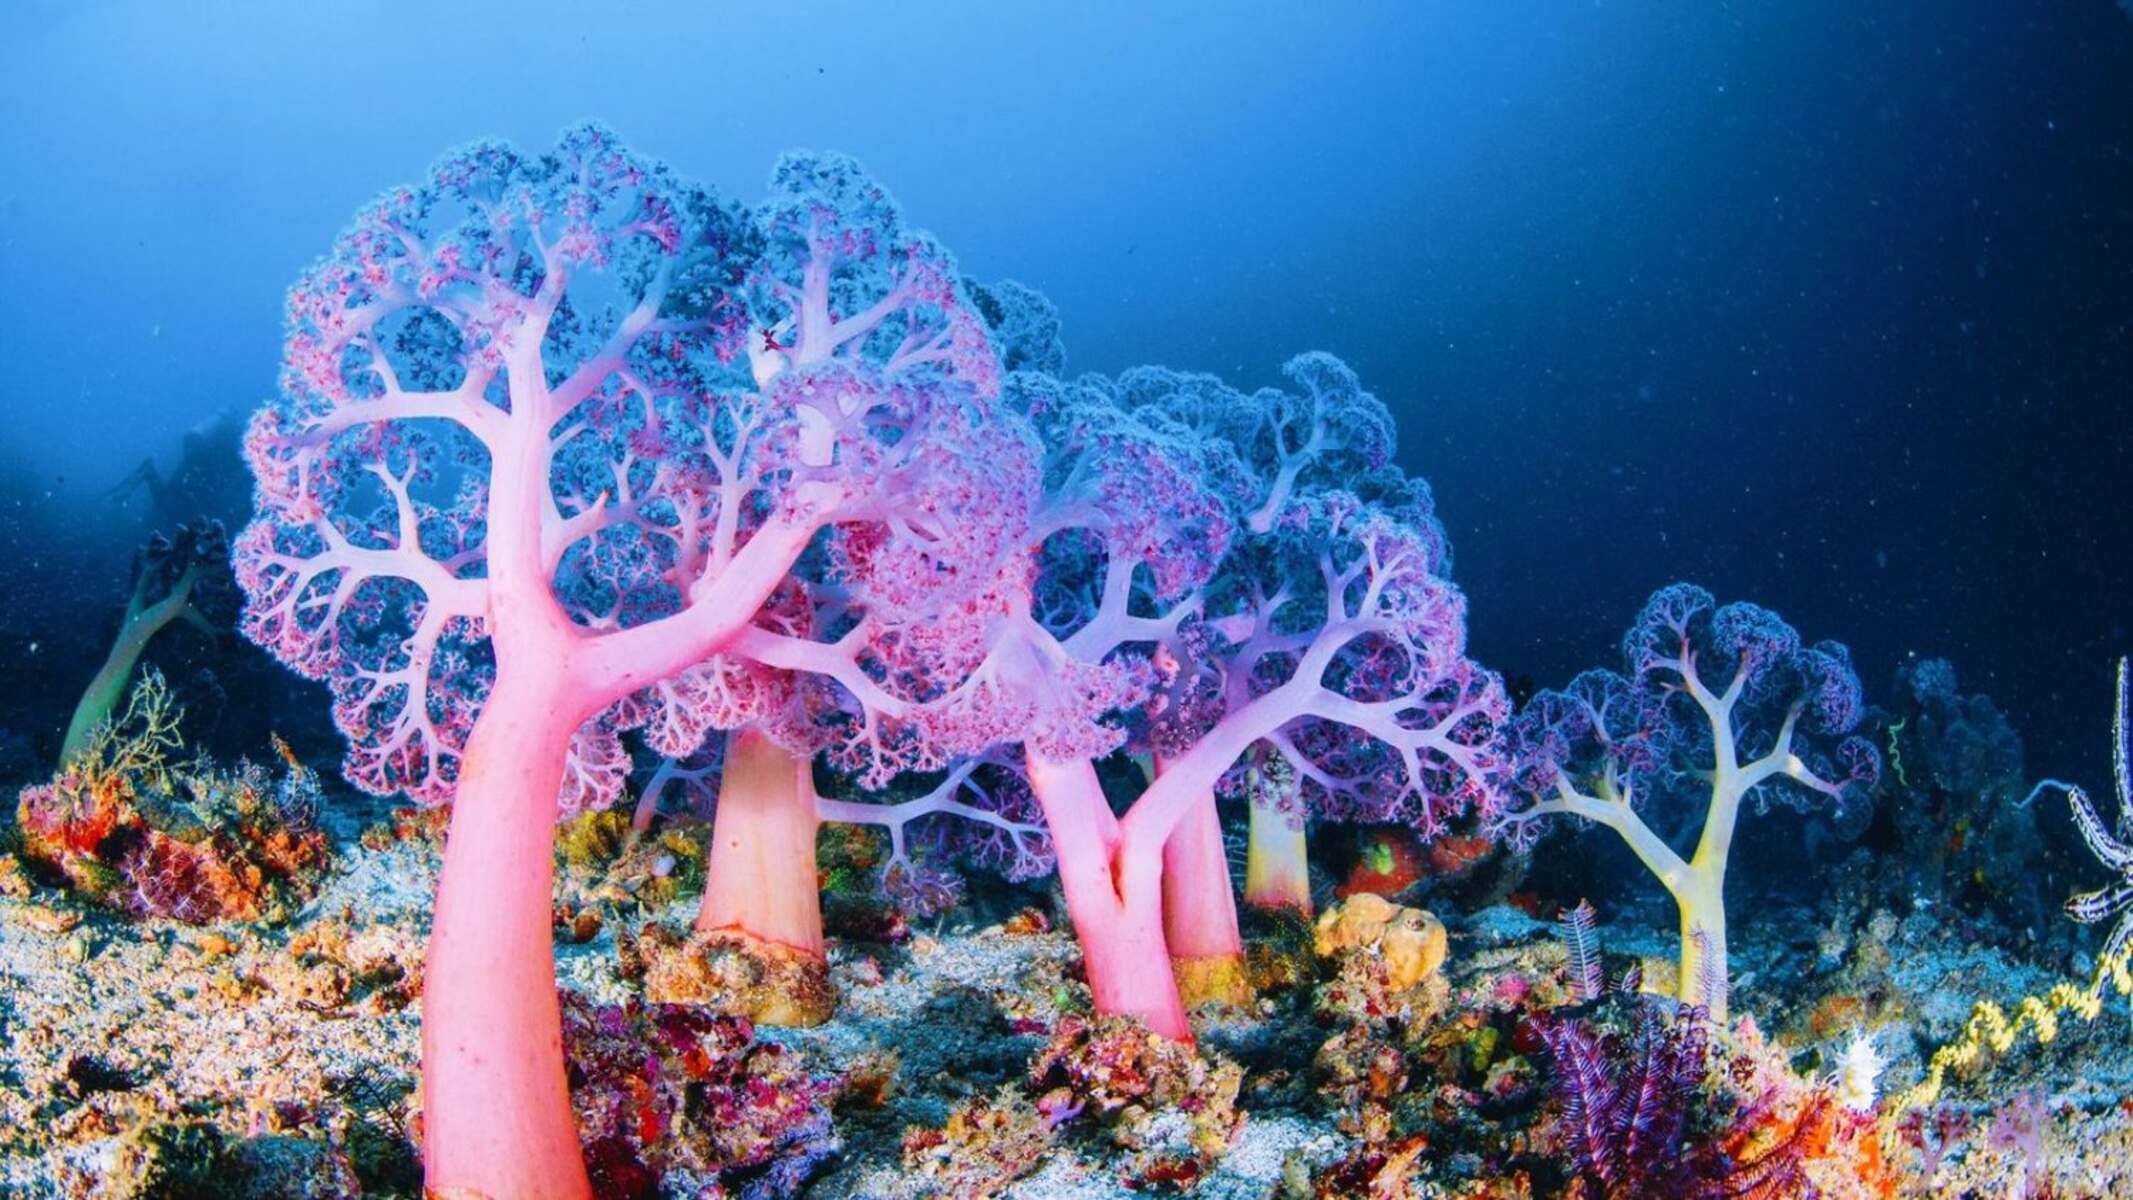 17-astounding-facts-about-coral-sea-reefs